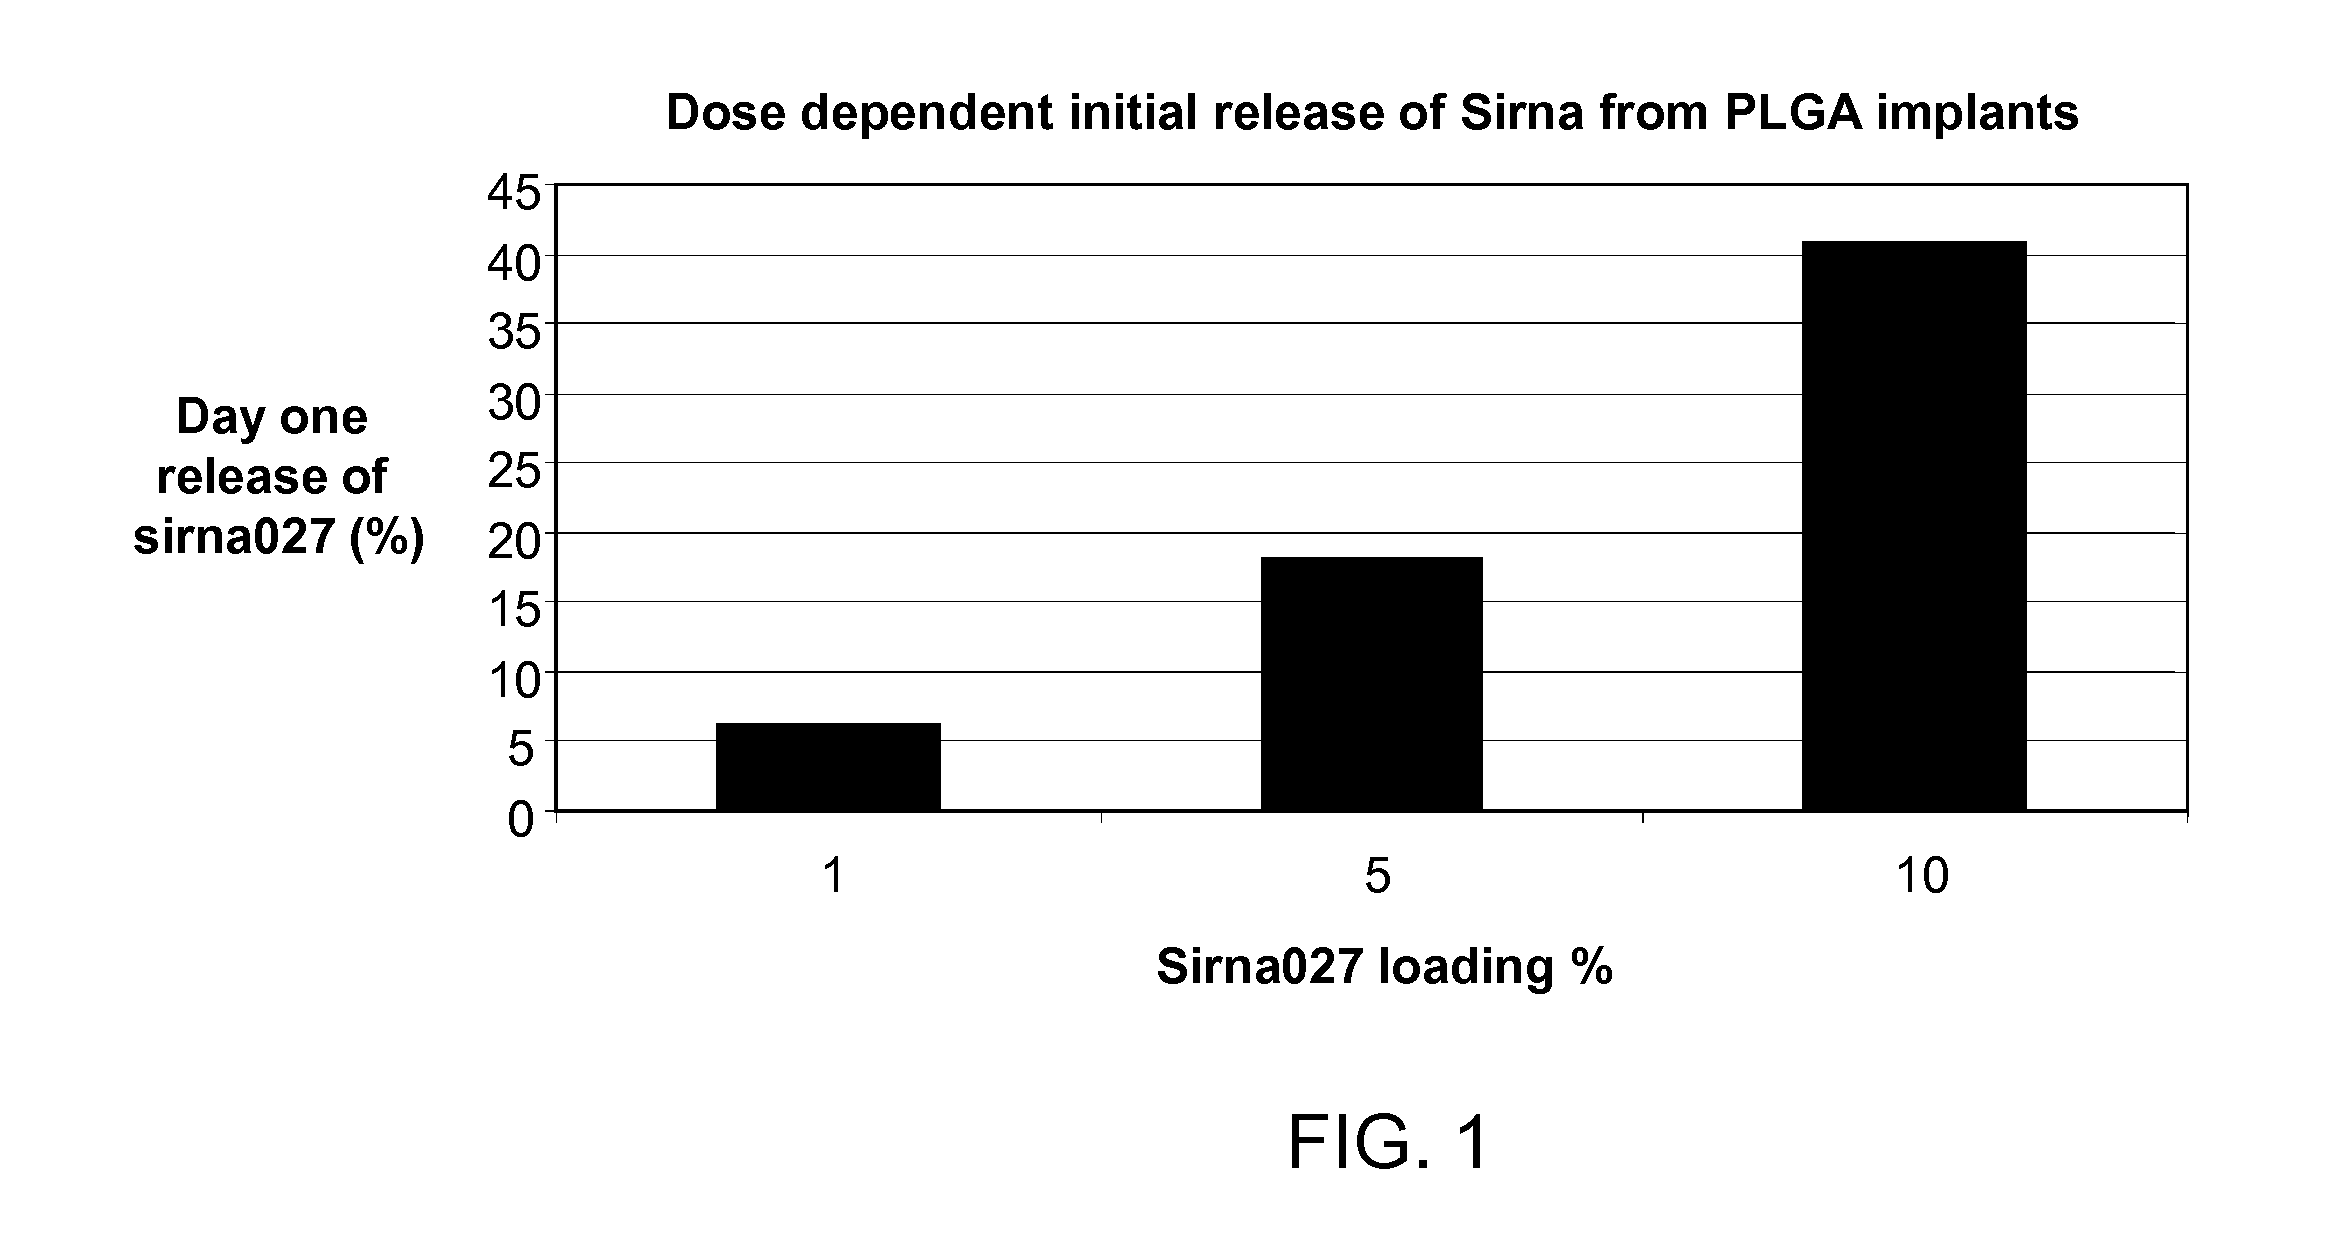 METHOD OF CONTROLLING INITIAL DRUG RELEASE OF siRNA FROM SUSTAINED-RELEASE IMPLANTS